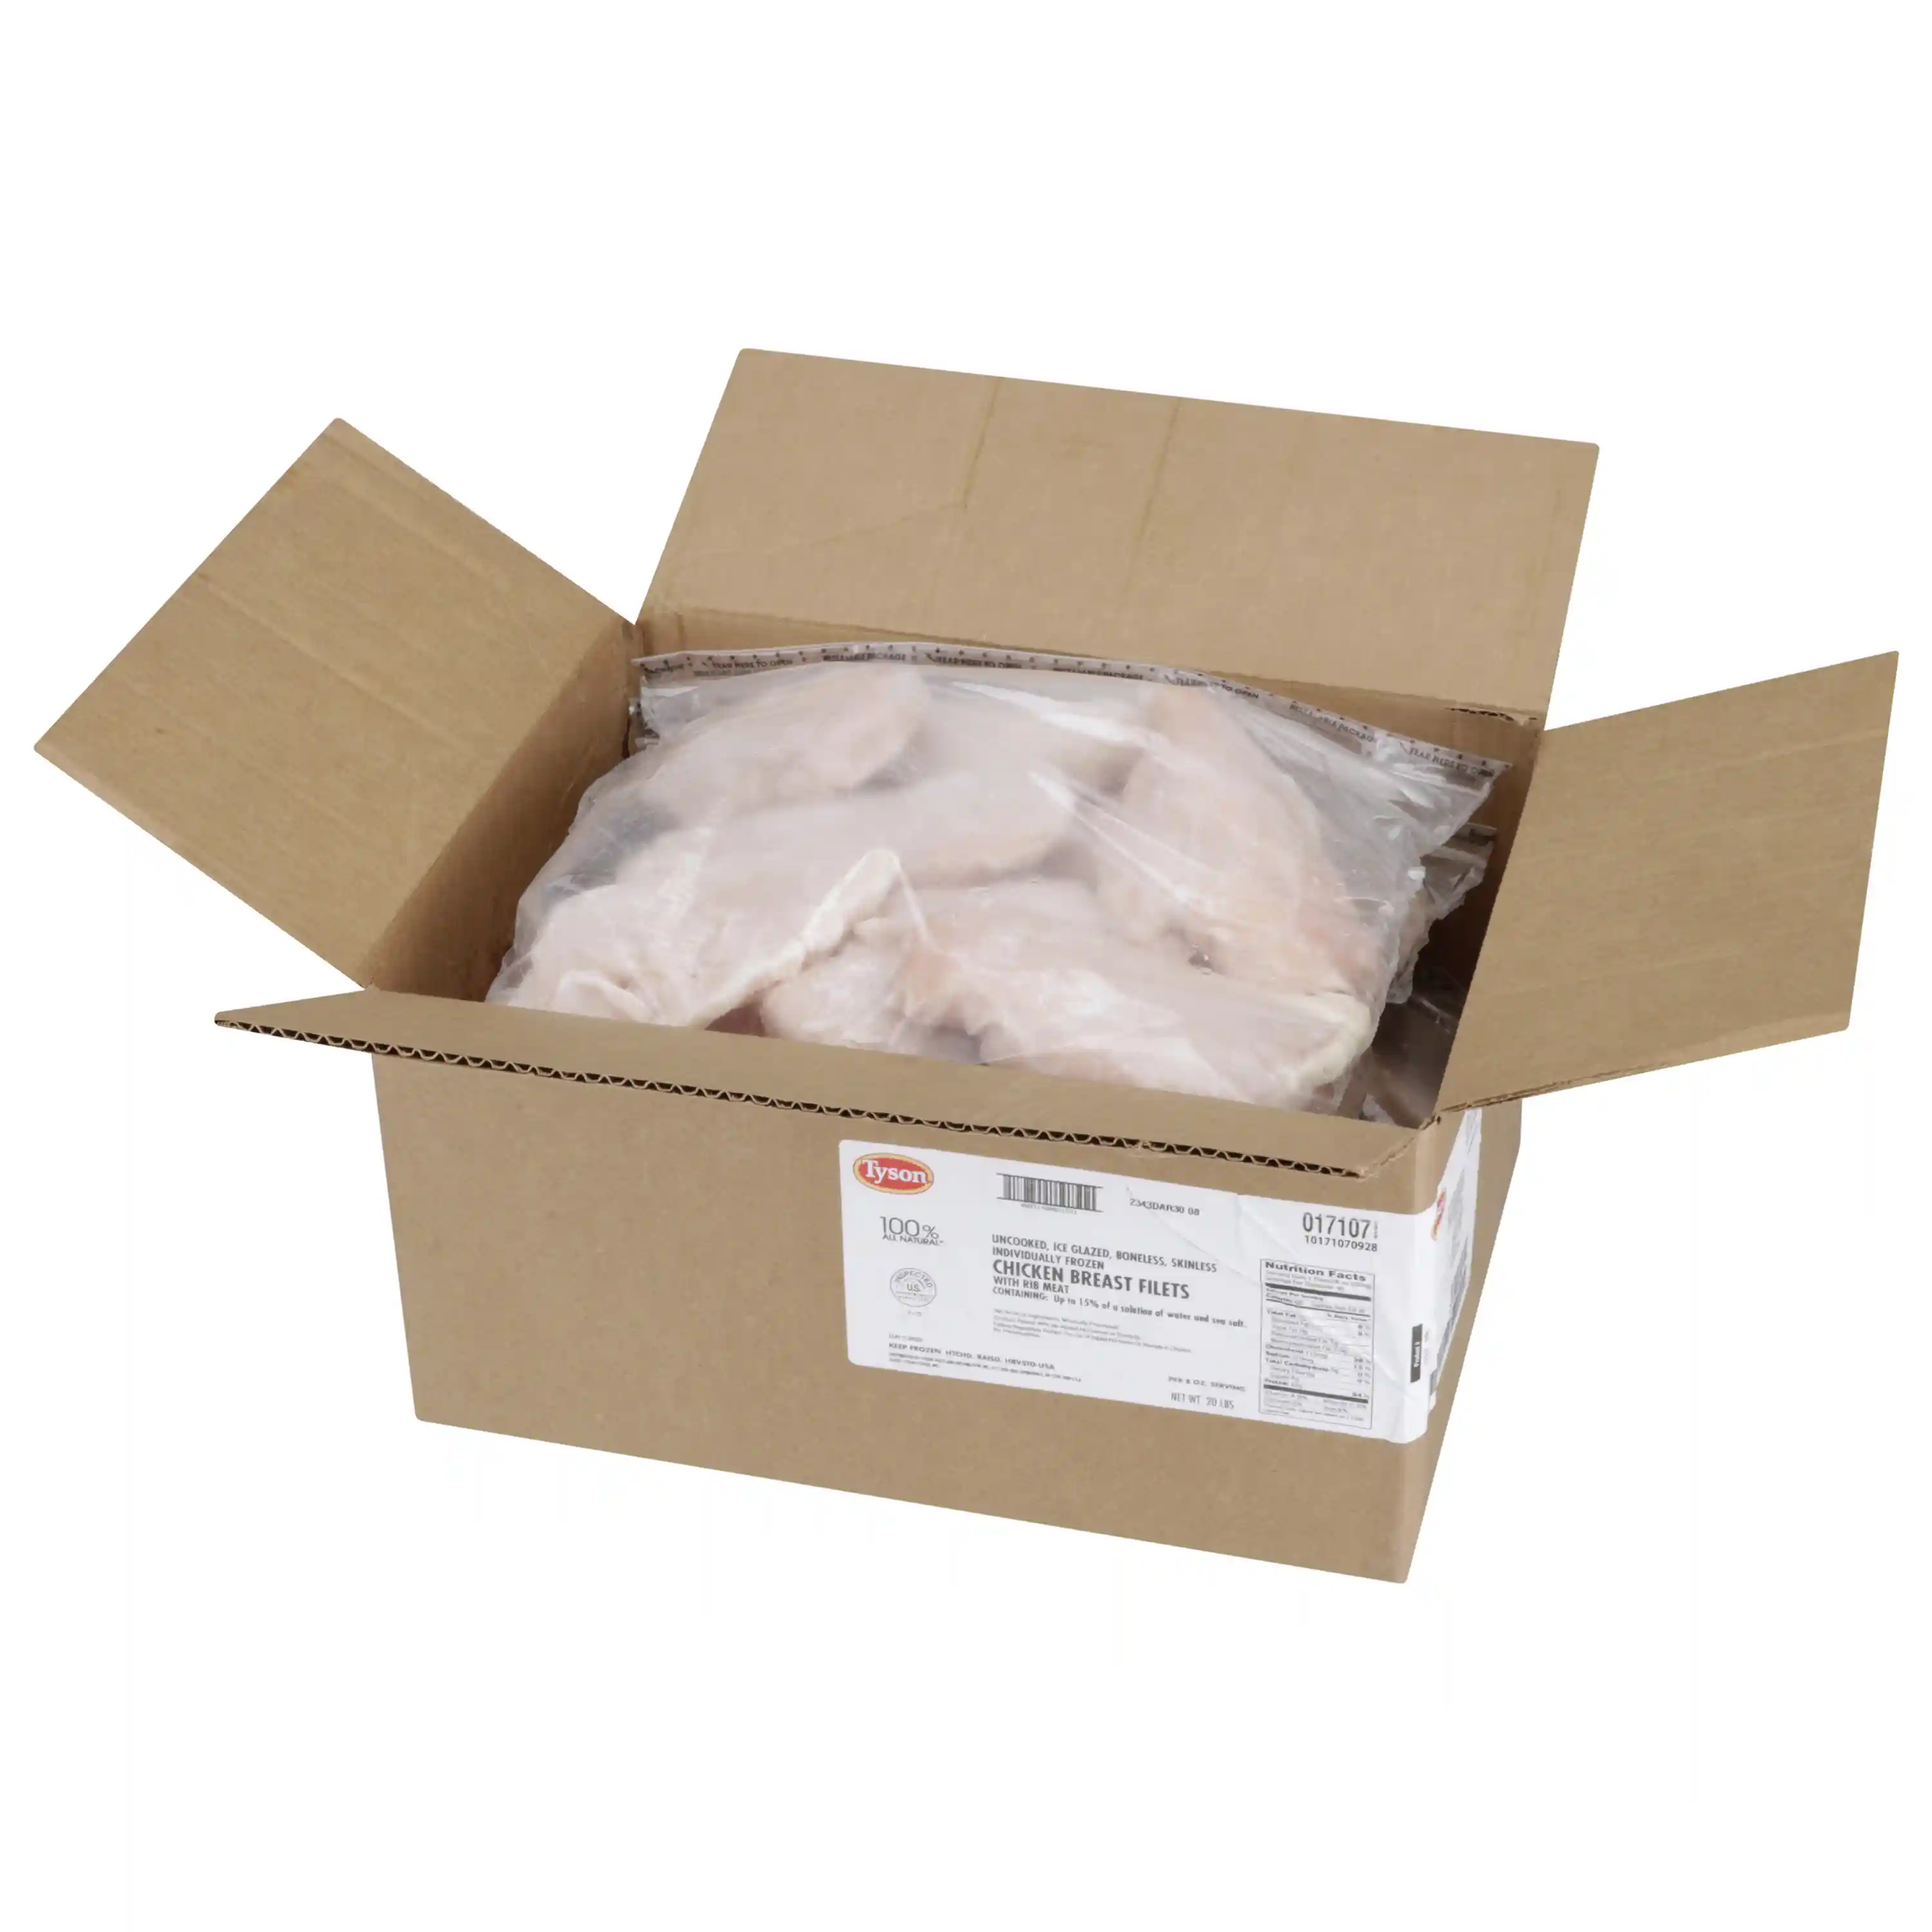 Tyson® All Natural* IF Unbreaded Boneless Skinless Chicken Breast Filets, 8 oz._image_21